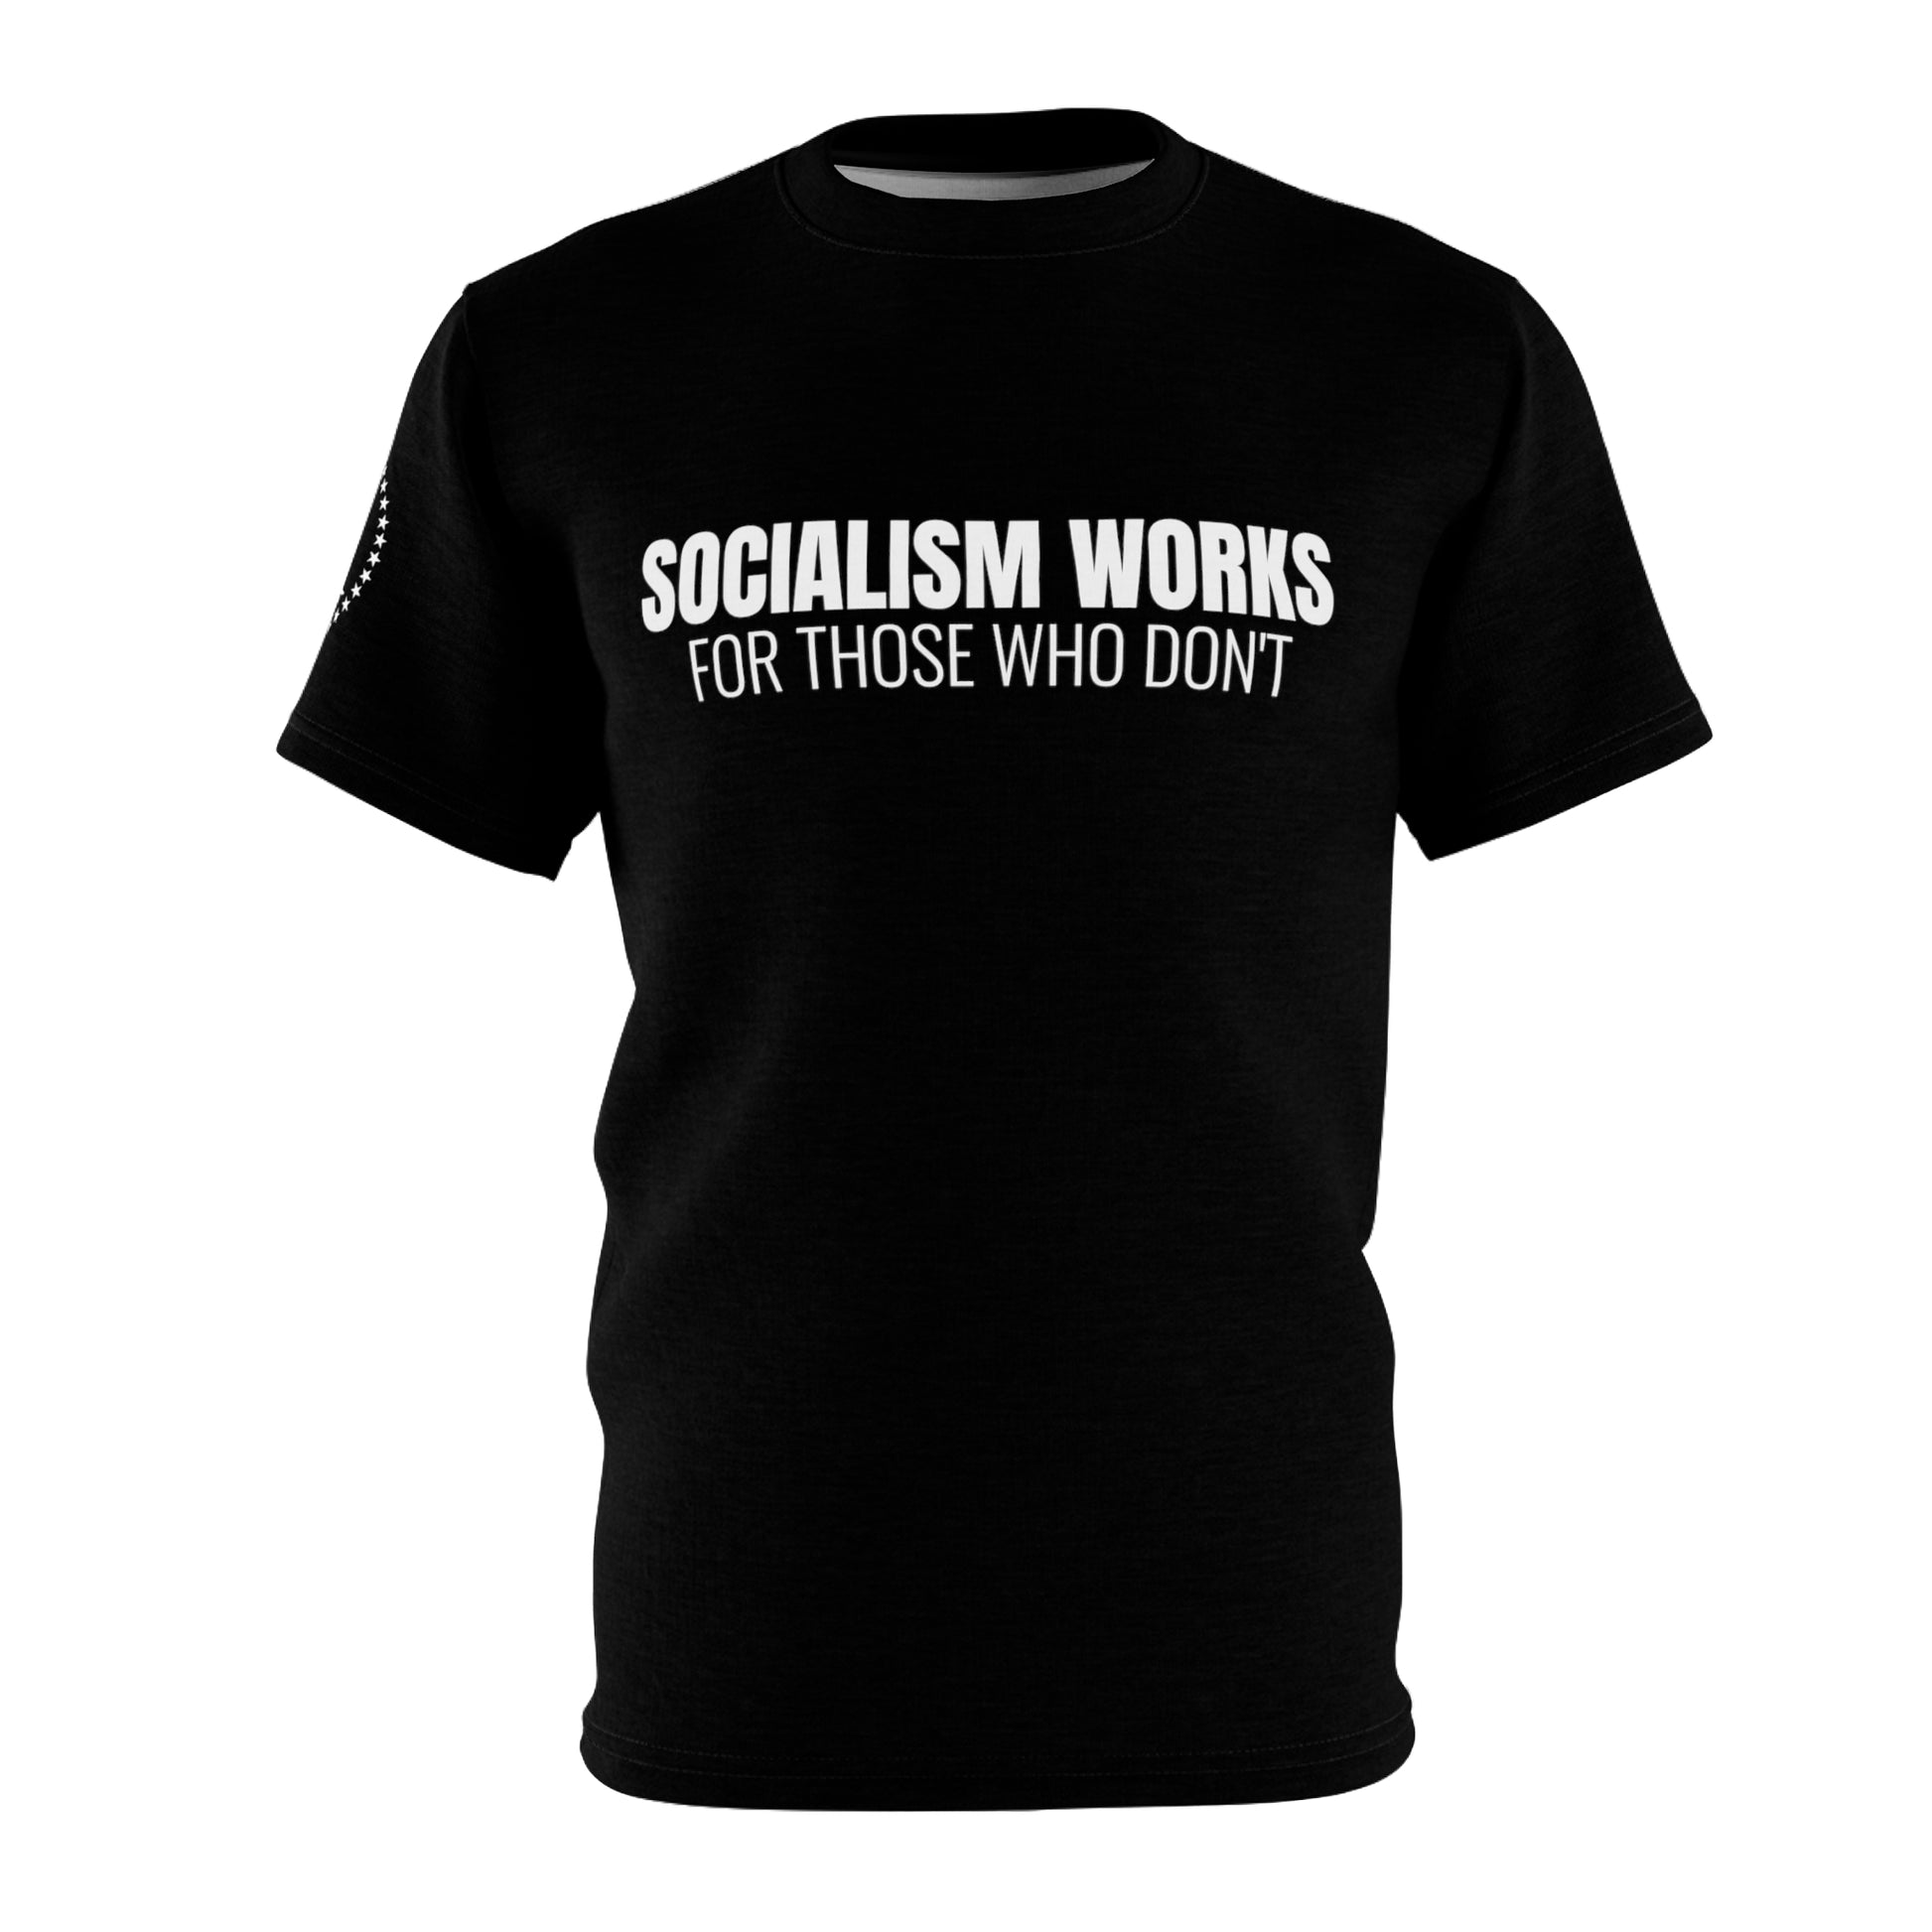 Funny Anti-Socialism T-Shirt, Conservative Political Humor Tee, Socialism Works For Those Who Don't Shirt - News For Reasonable People